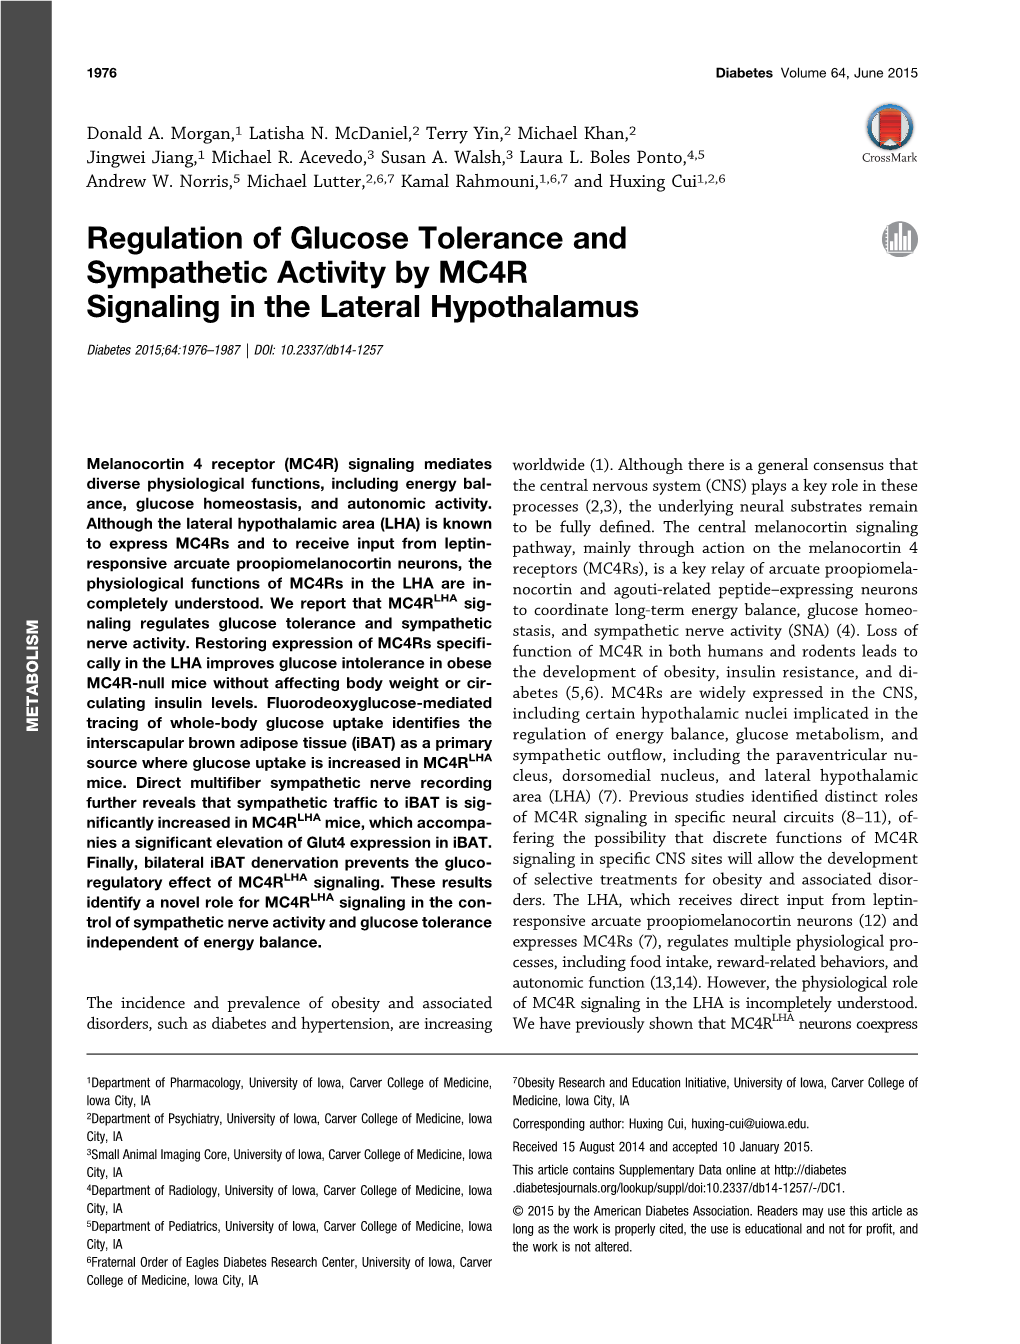 Regulation of Glucose Tolerance and Sympathetic Activity by MC4R Signaling in the Lateral Hypothalamus